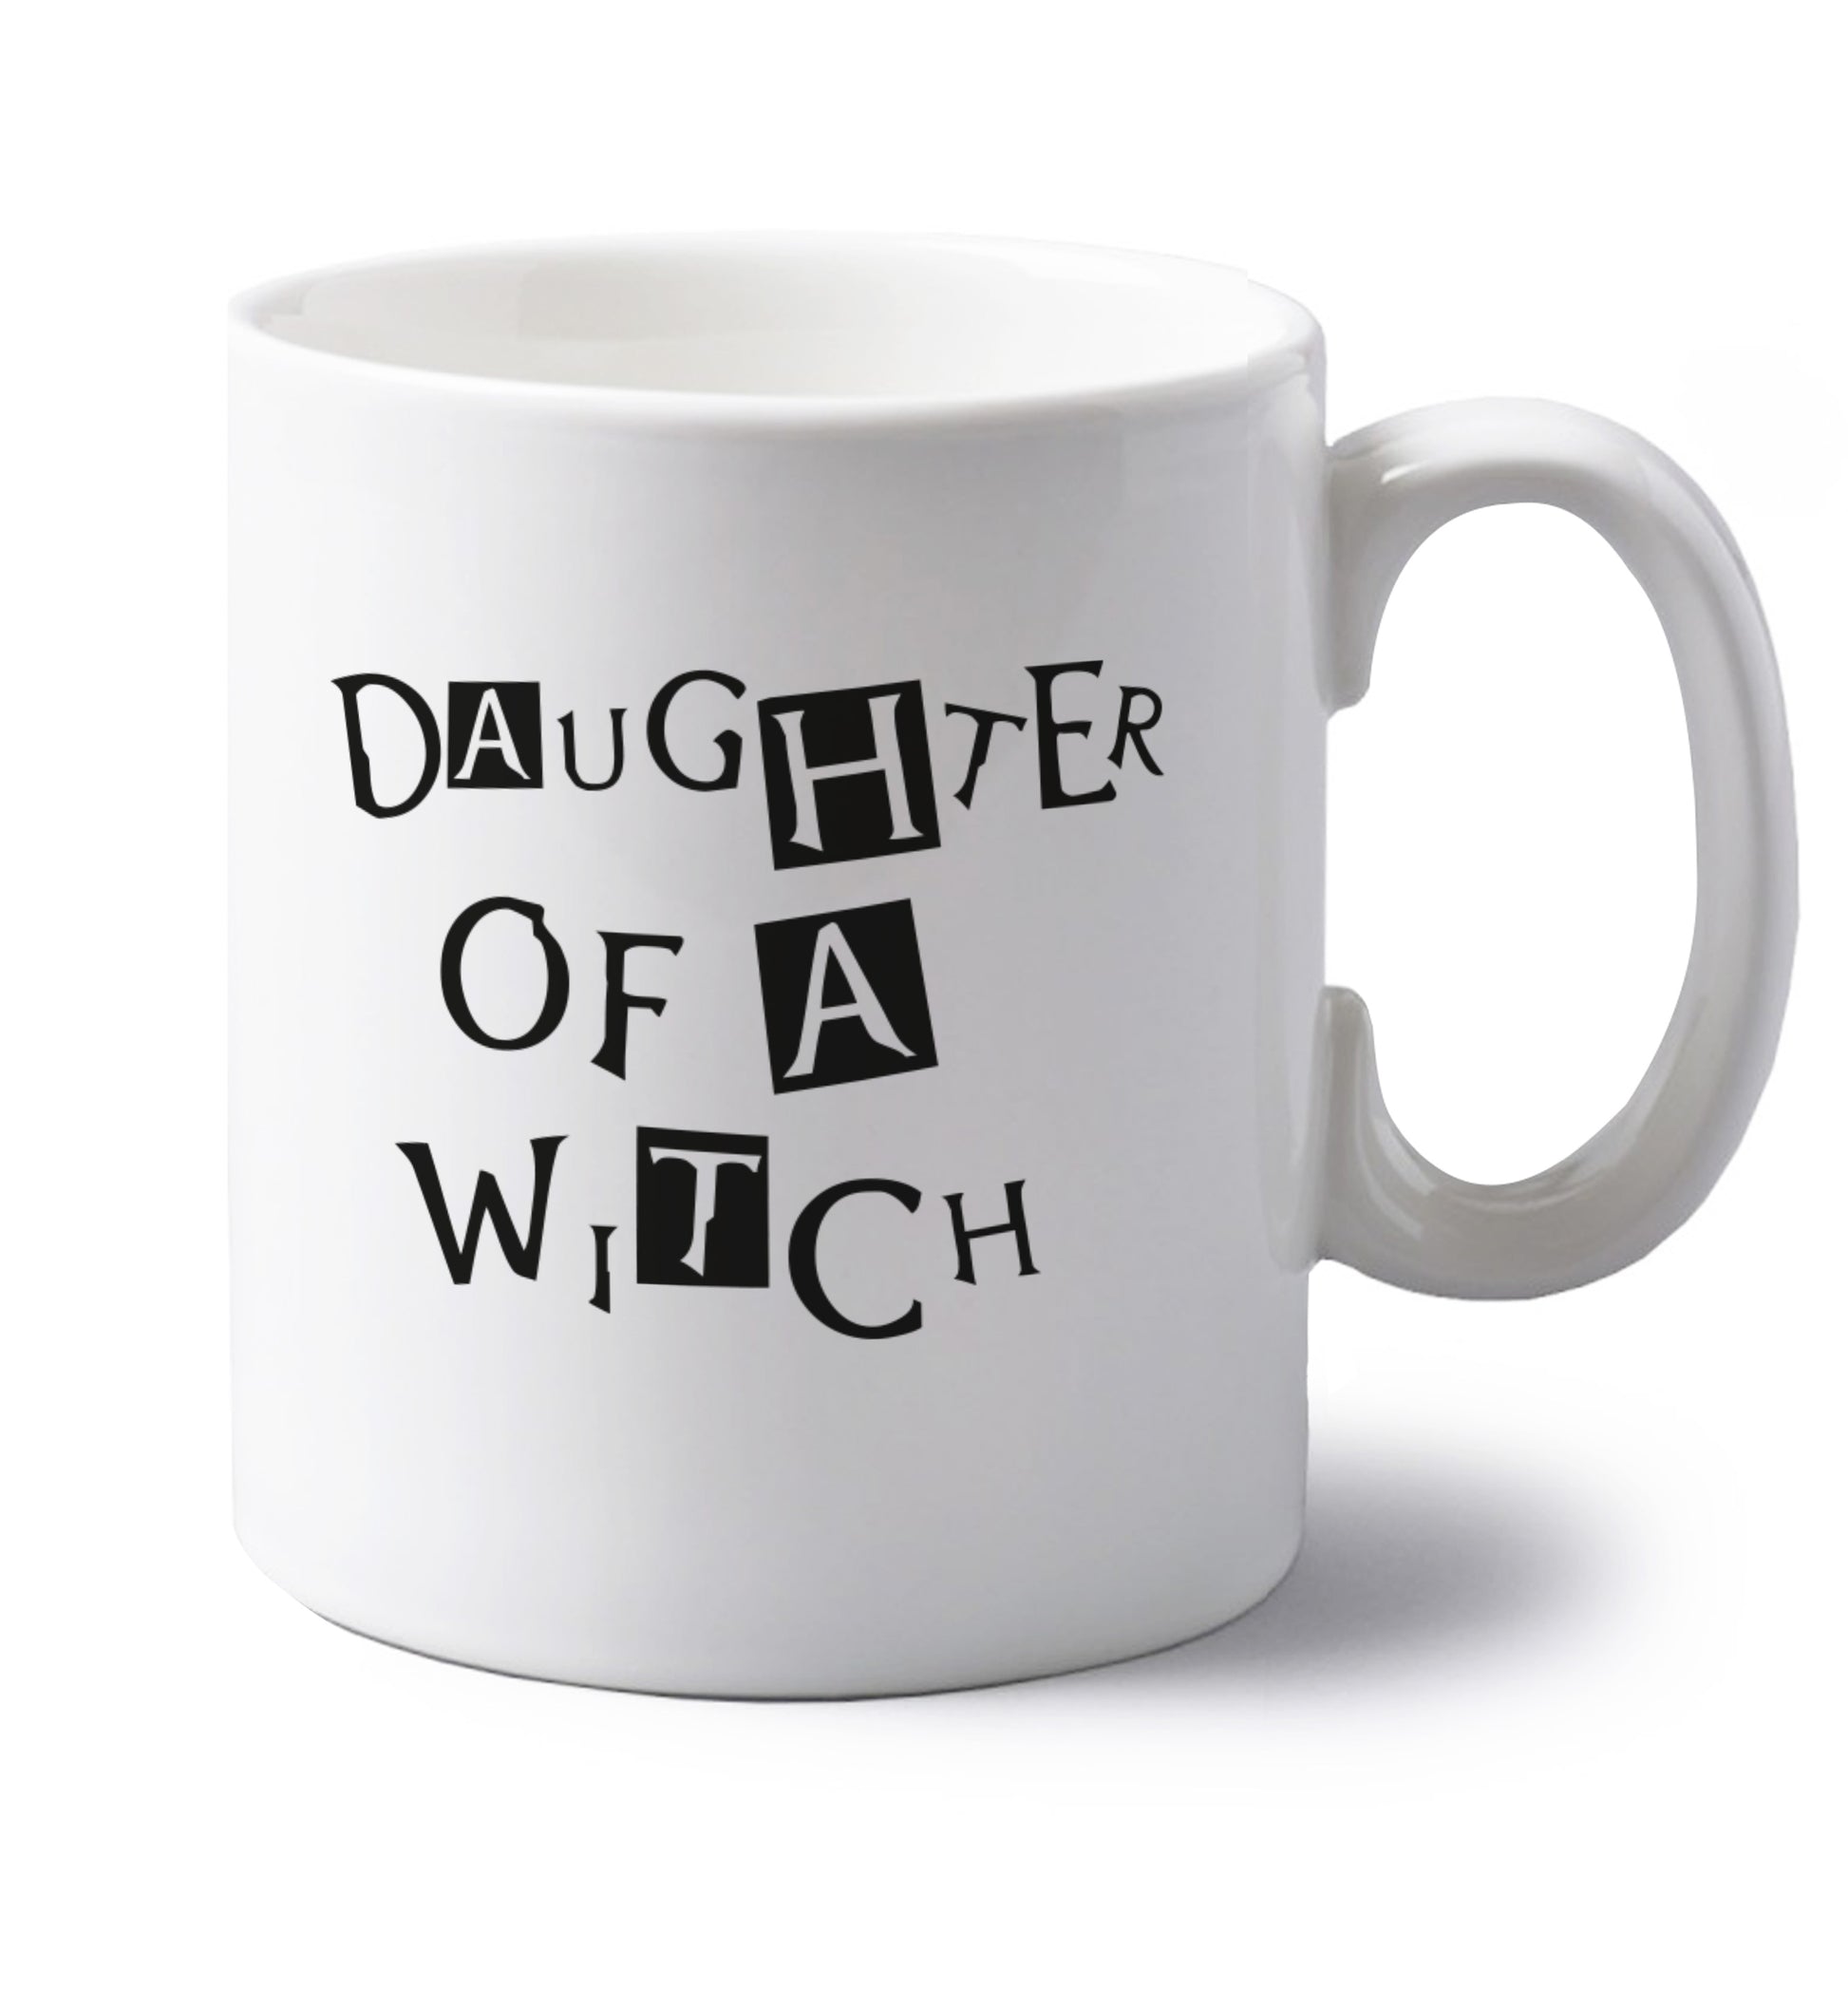 Daughter of a witch left handed white ceramic mug 